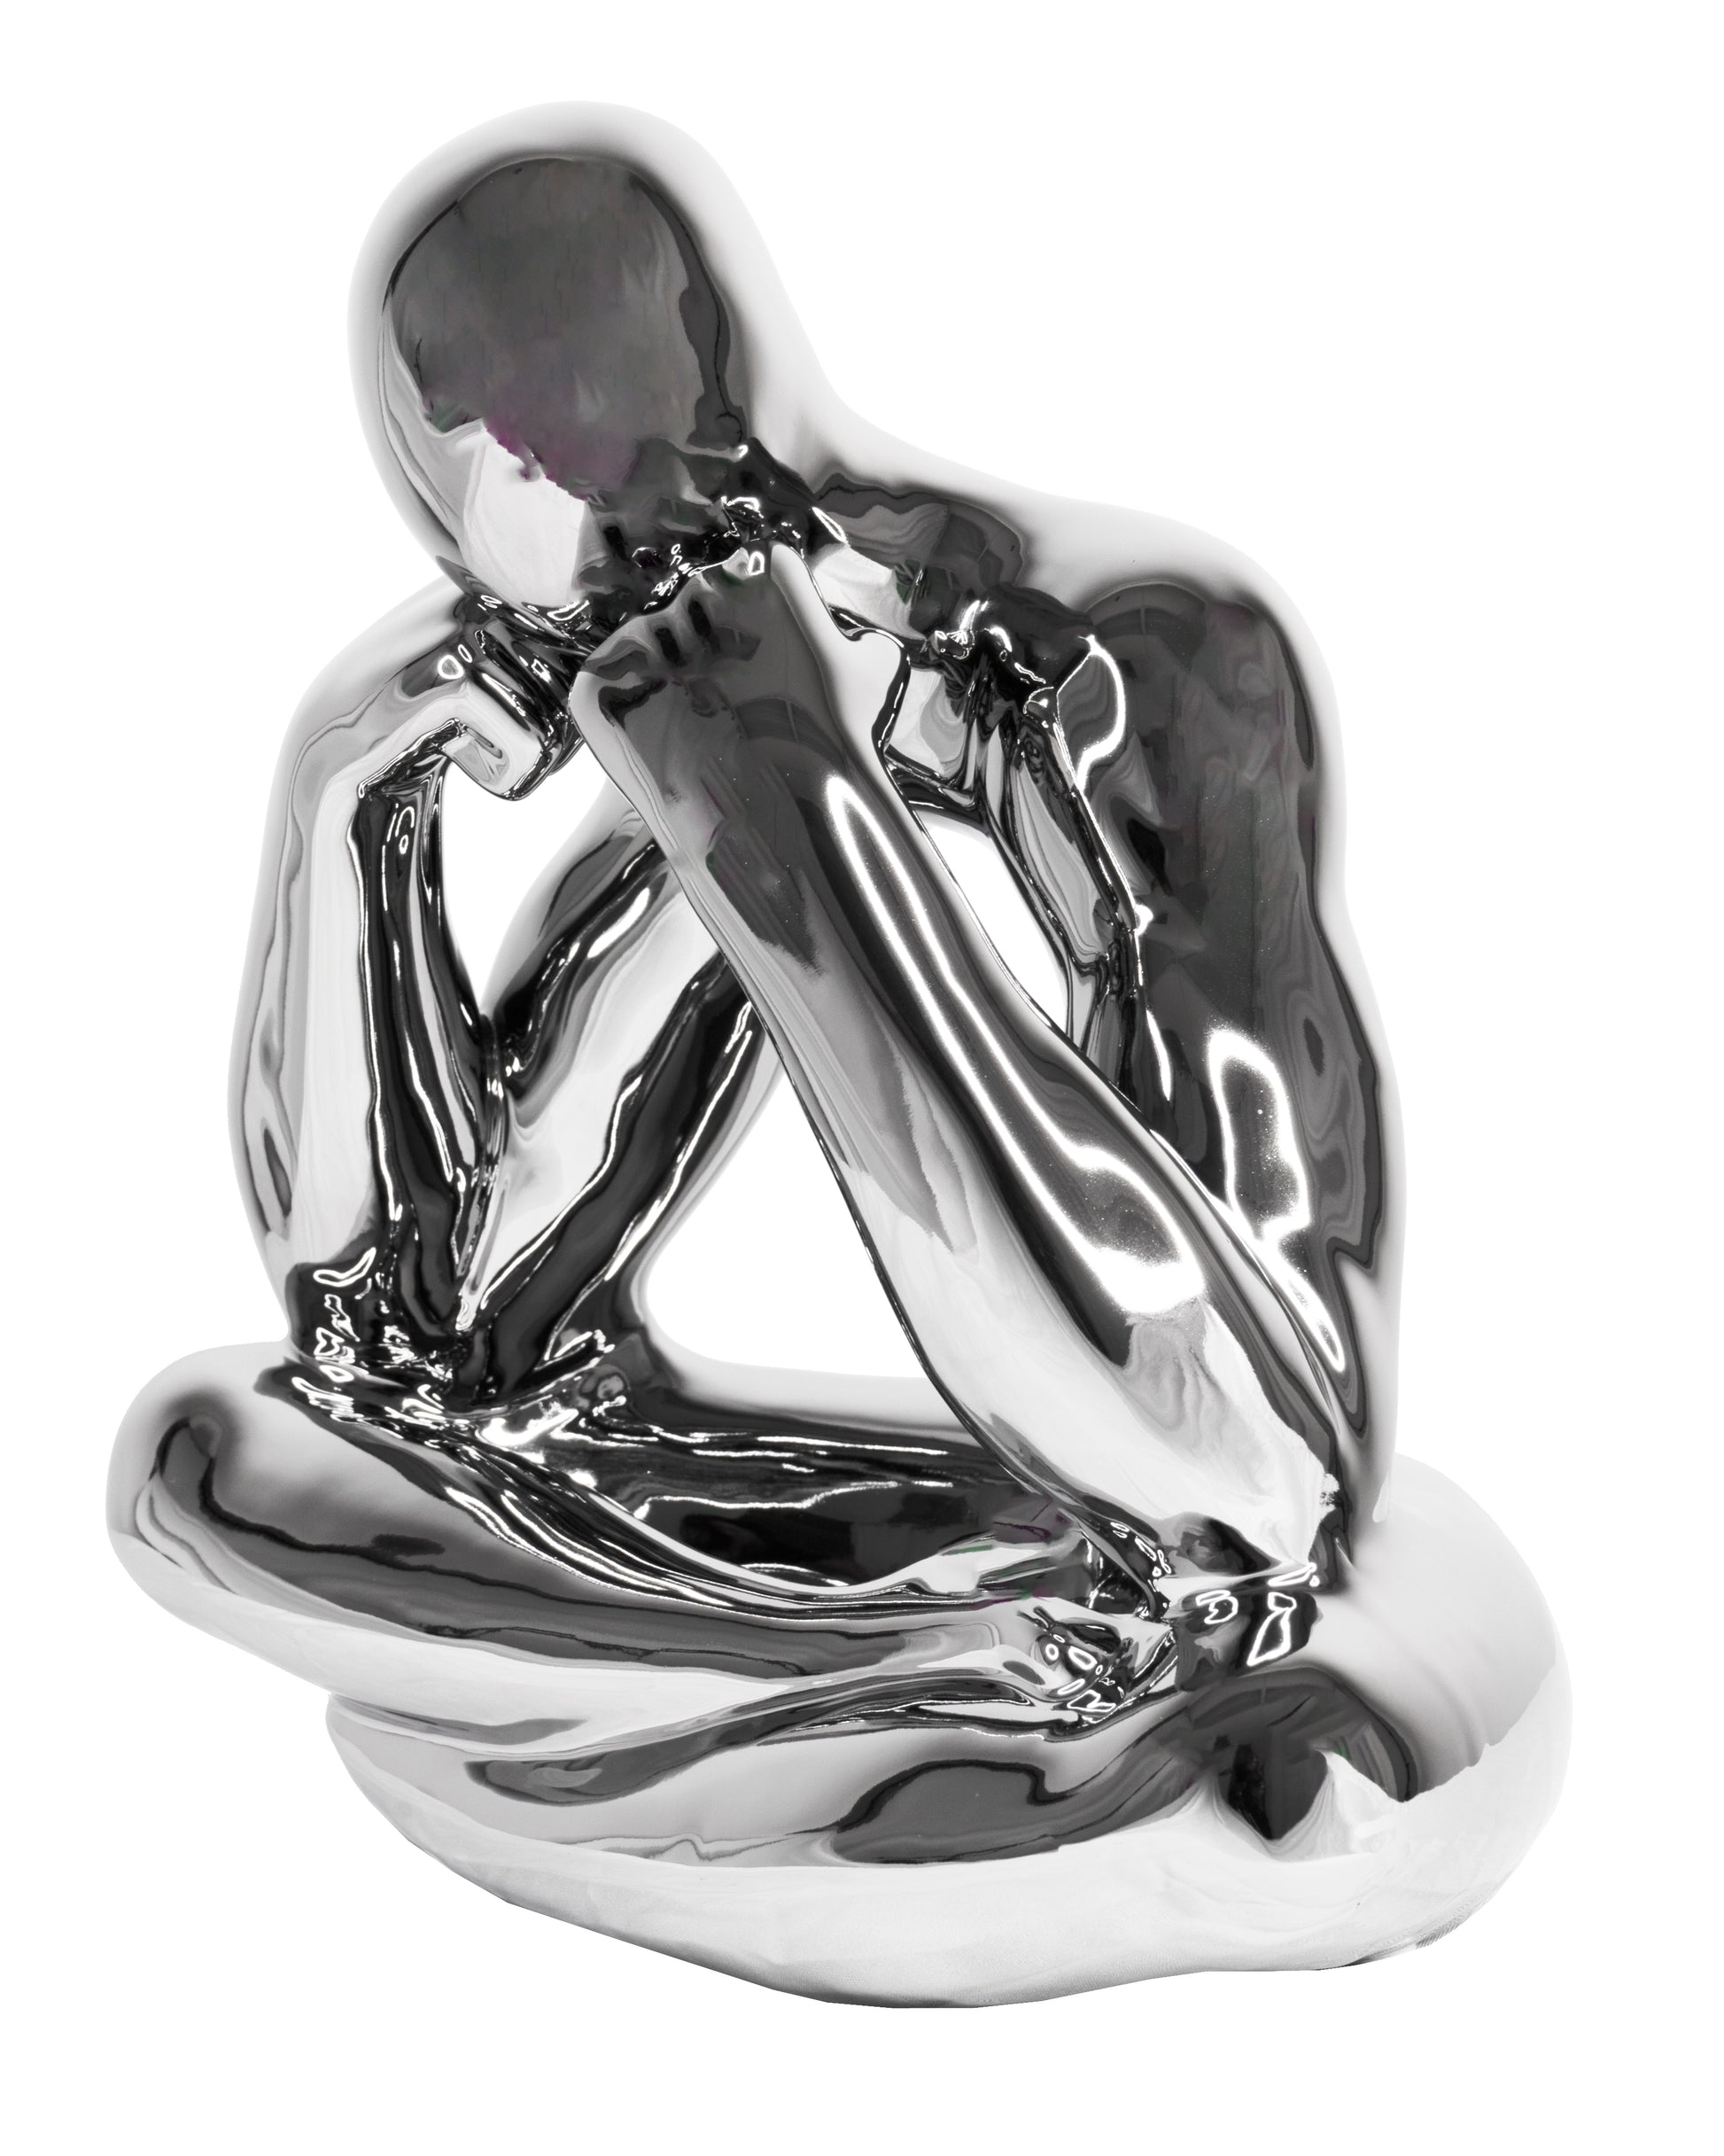 Pensive Thinking Tabletop Sculpture - Expo Home Decor